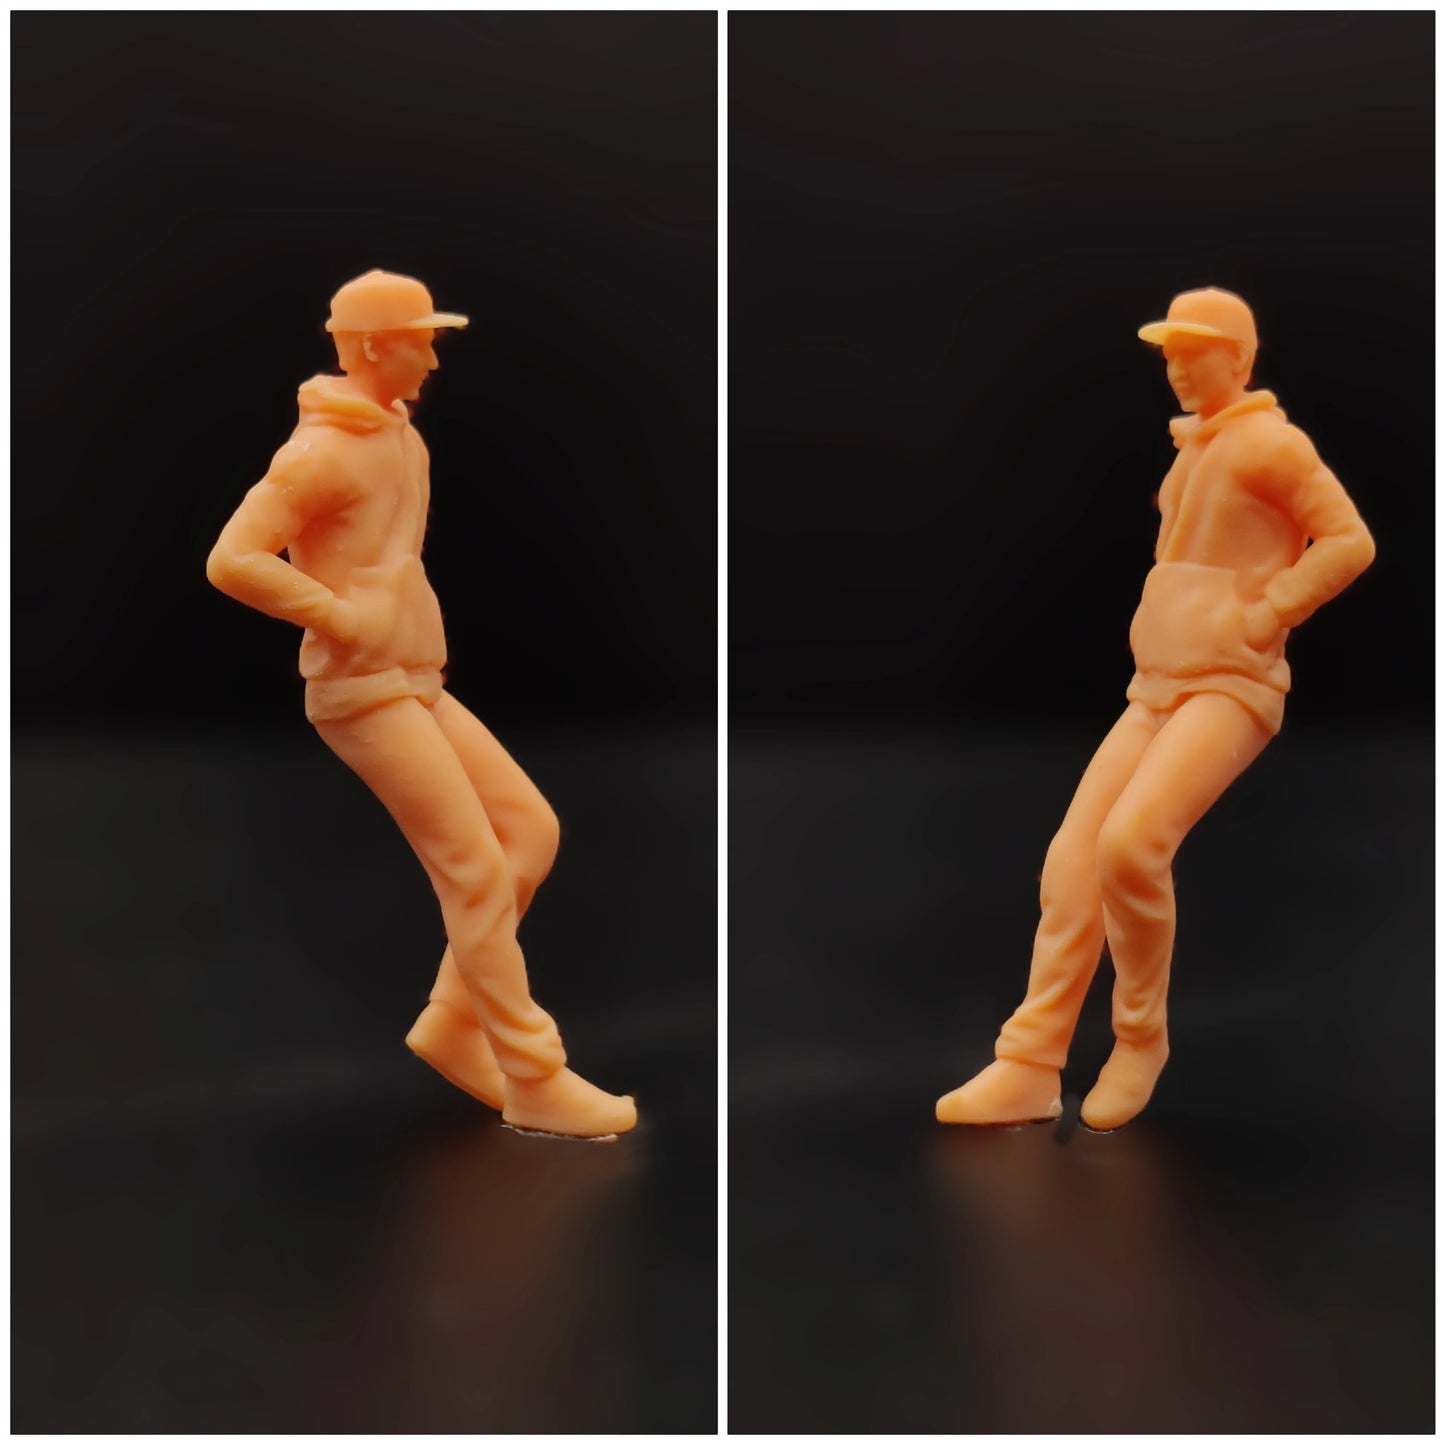 1/64 1/43 Figurines Scale Model Resin Man Hat with PostureUncolored Miniatures Diorama Hand-paintedT813 T814